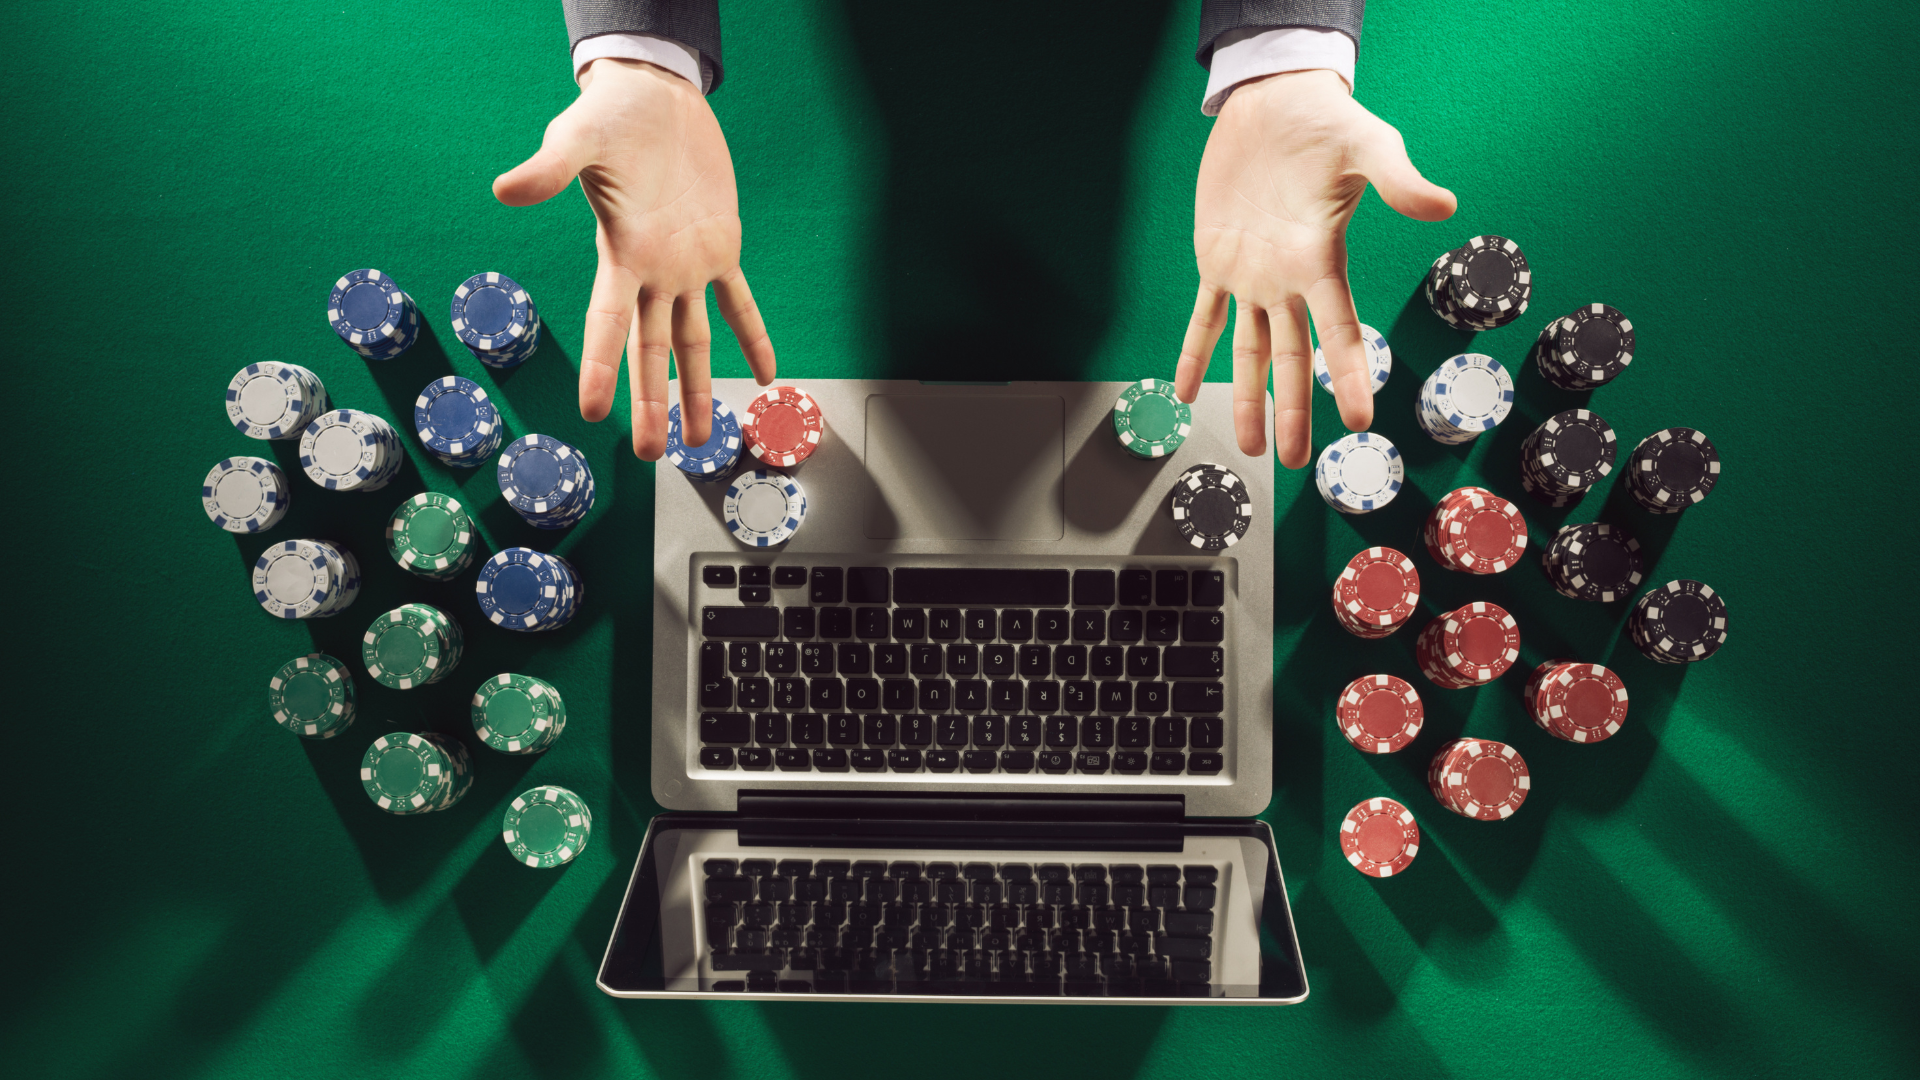 Online Casino: A Way to Have Fun and Potentially Make Some Money